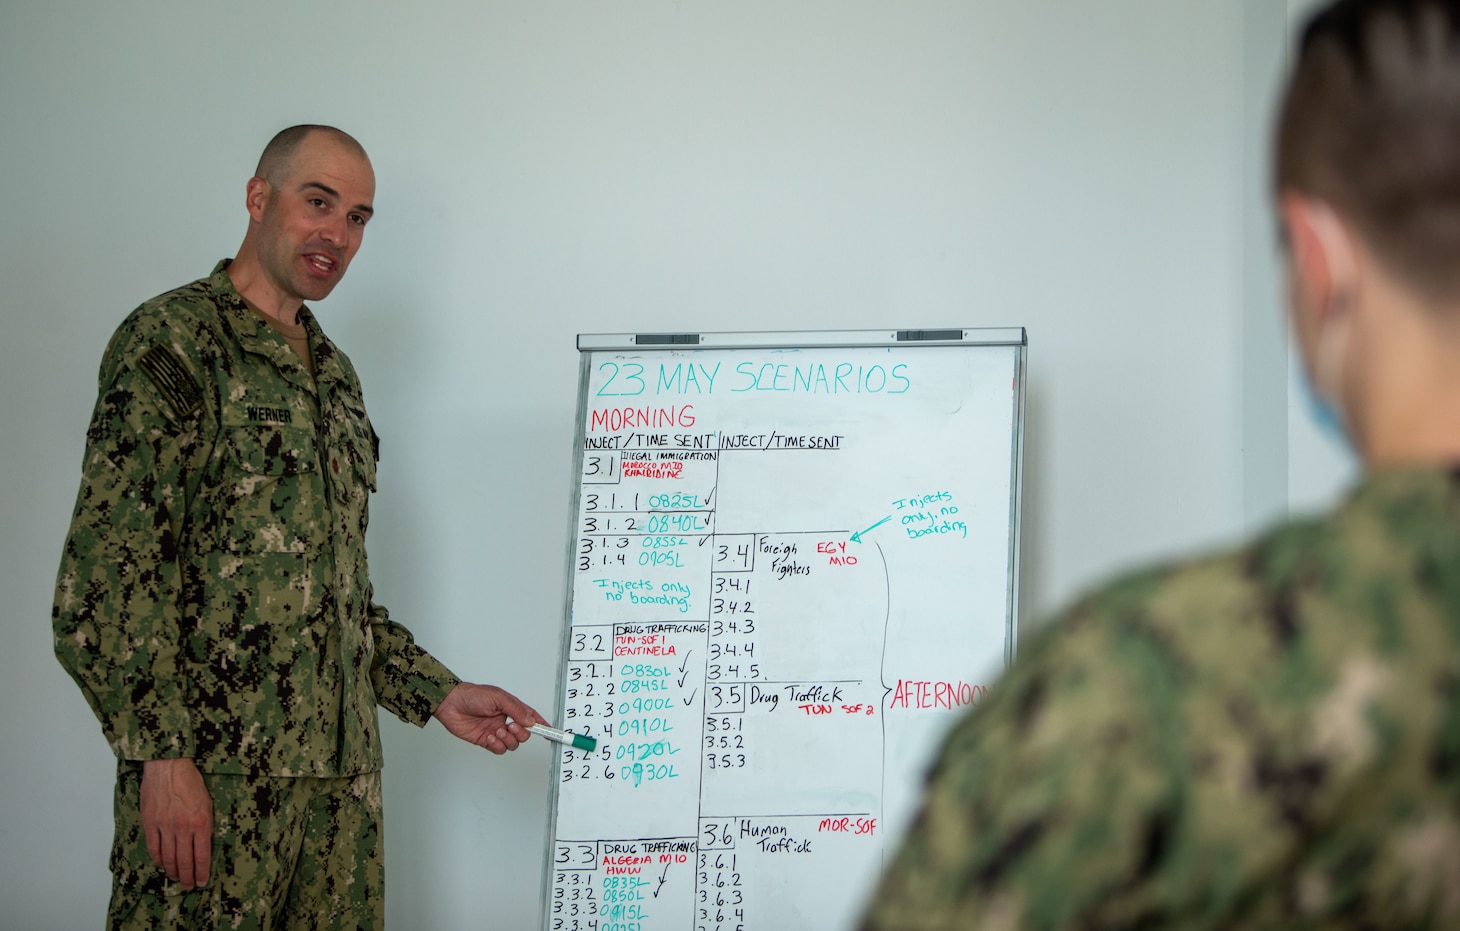 Lt. Cmdr. Evans Werner, operations officer for NR CNE-CNA-C6F MPP DET 205, leads a scenario timeline meeting during exercise Phoenix Express 2021 hosted by Tunisia from May 17-28, 2021. Phoenix Express, conducted by U.S. Naval Forces Africa, is an at-sea maritime exercise designed to improve cooperation among participating nations in order to increase maritime safety and security in the Mediterranean. (U.S. Navy photo by Mass Communication Specialist 2nd Class Daniel Charest)